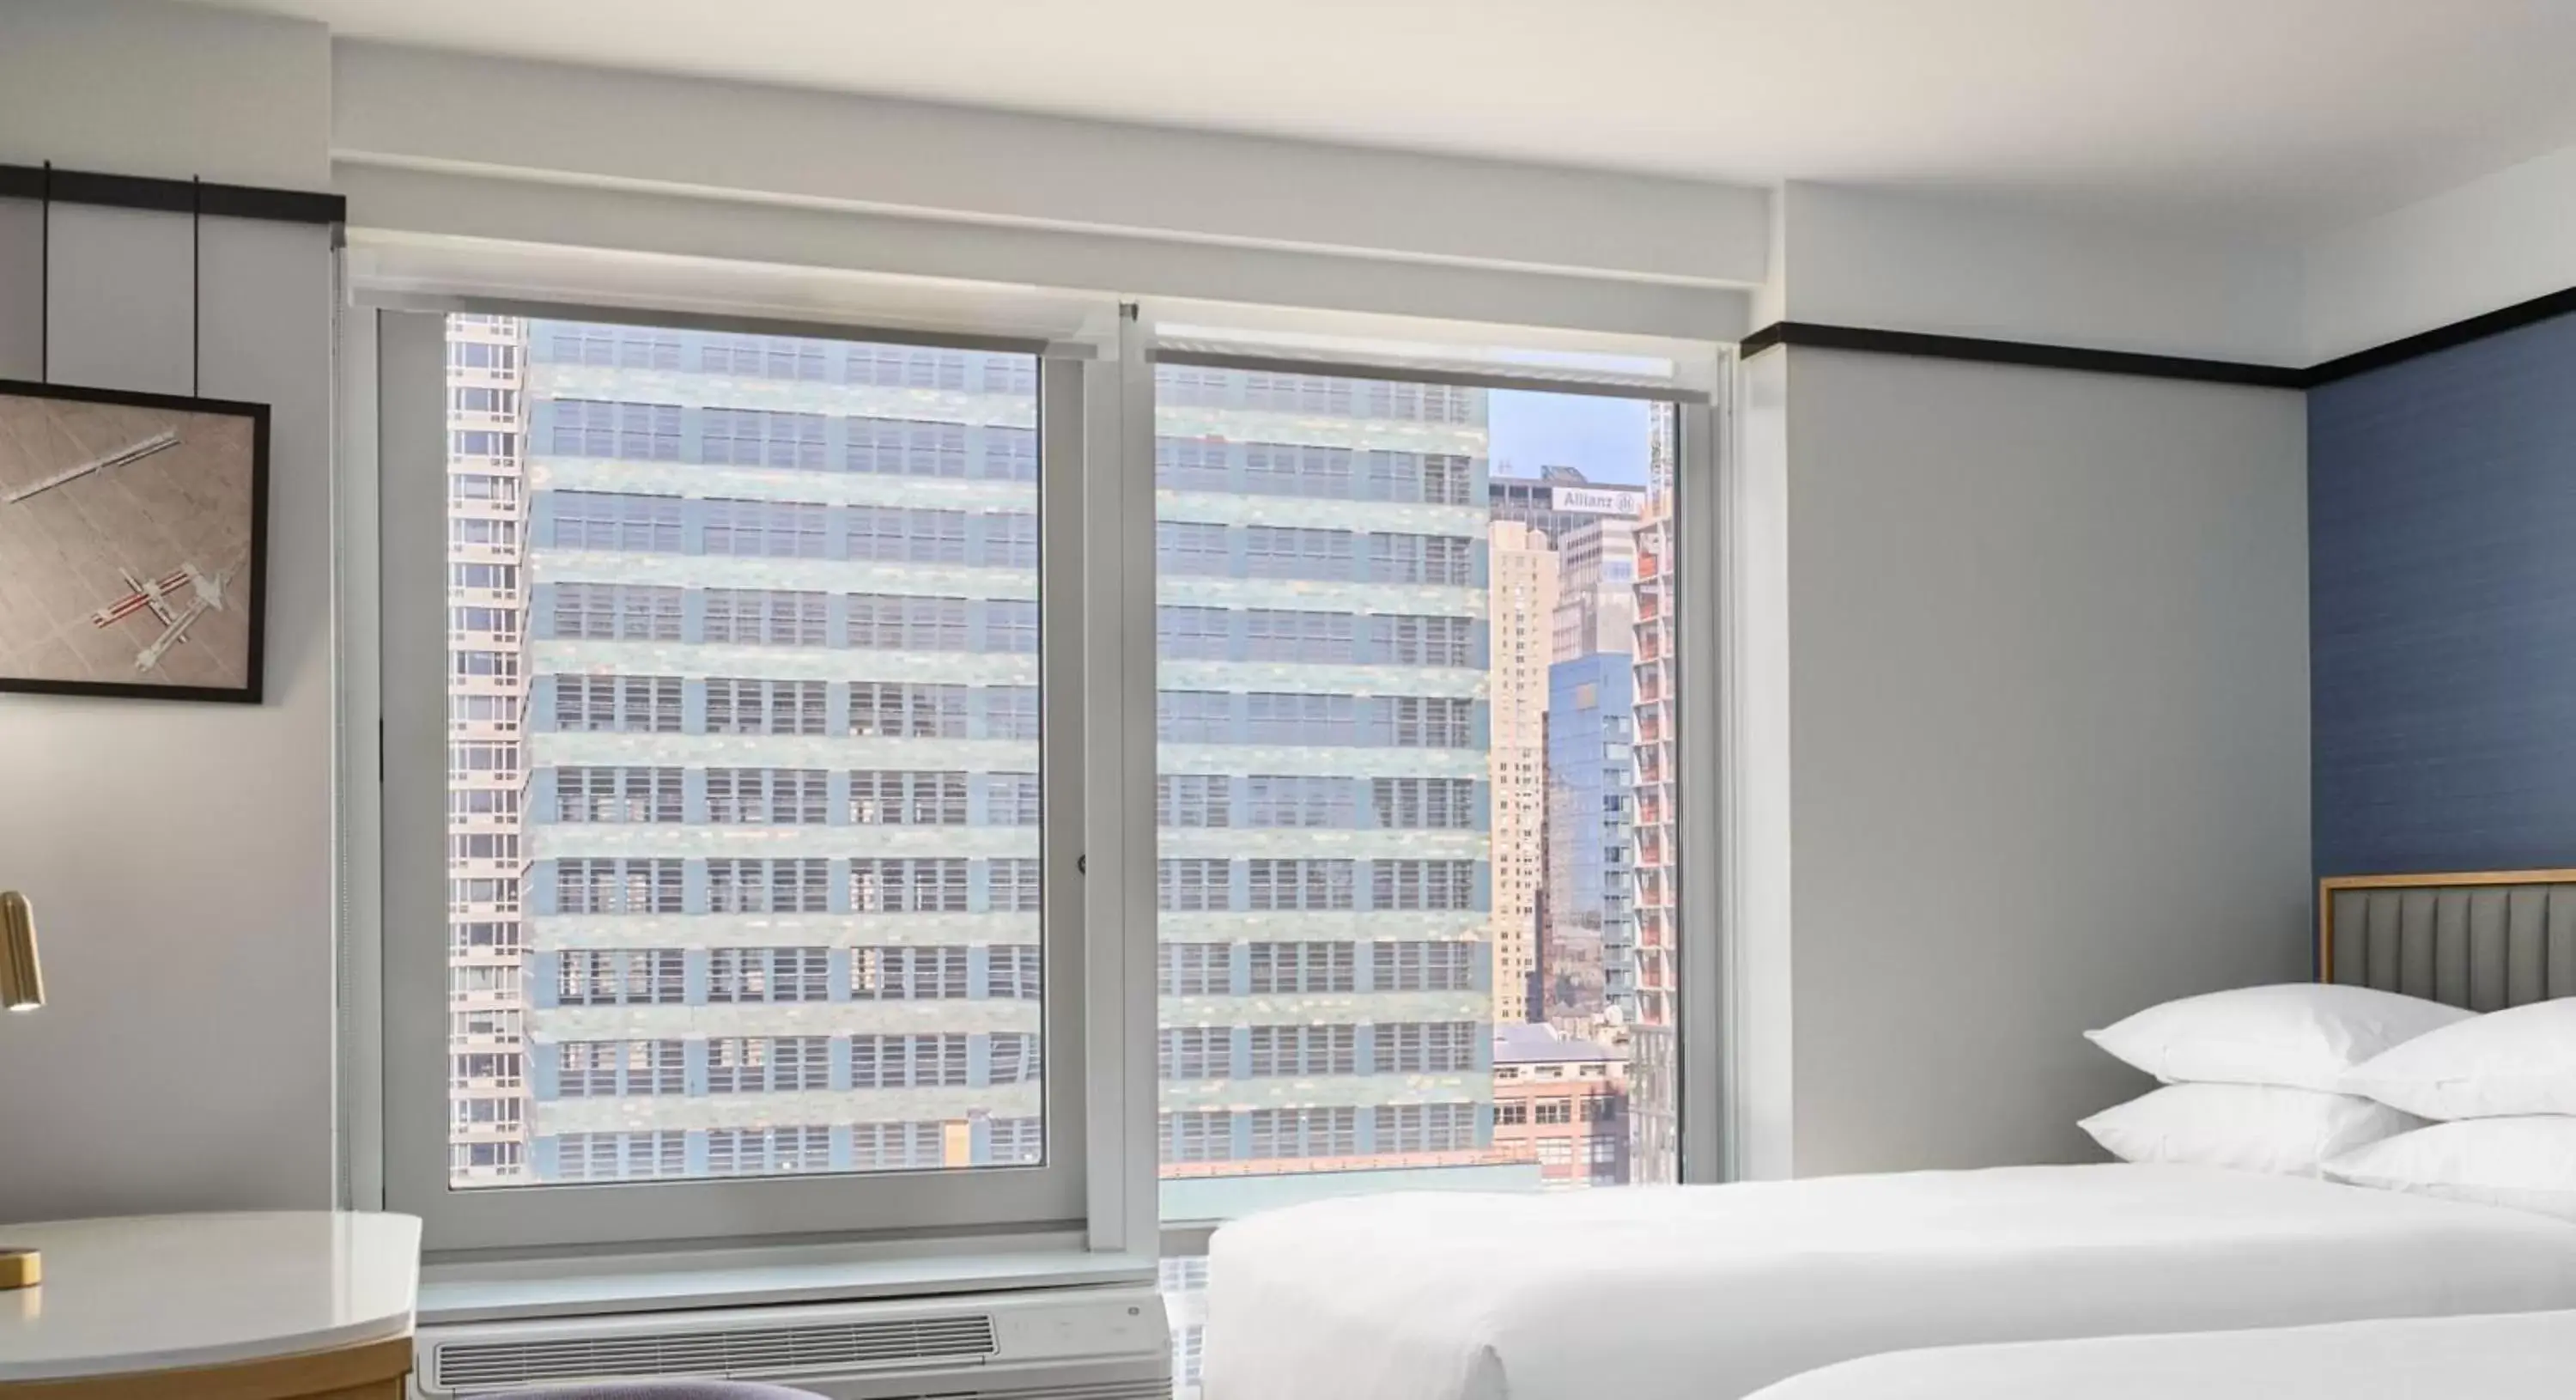 View (from property/room) in Delta Hotels by Marriott New York Times Square